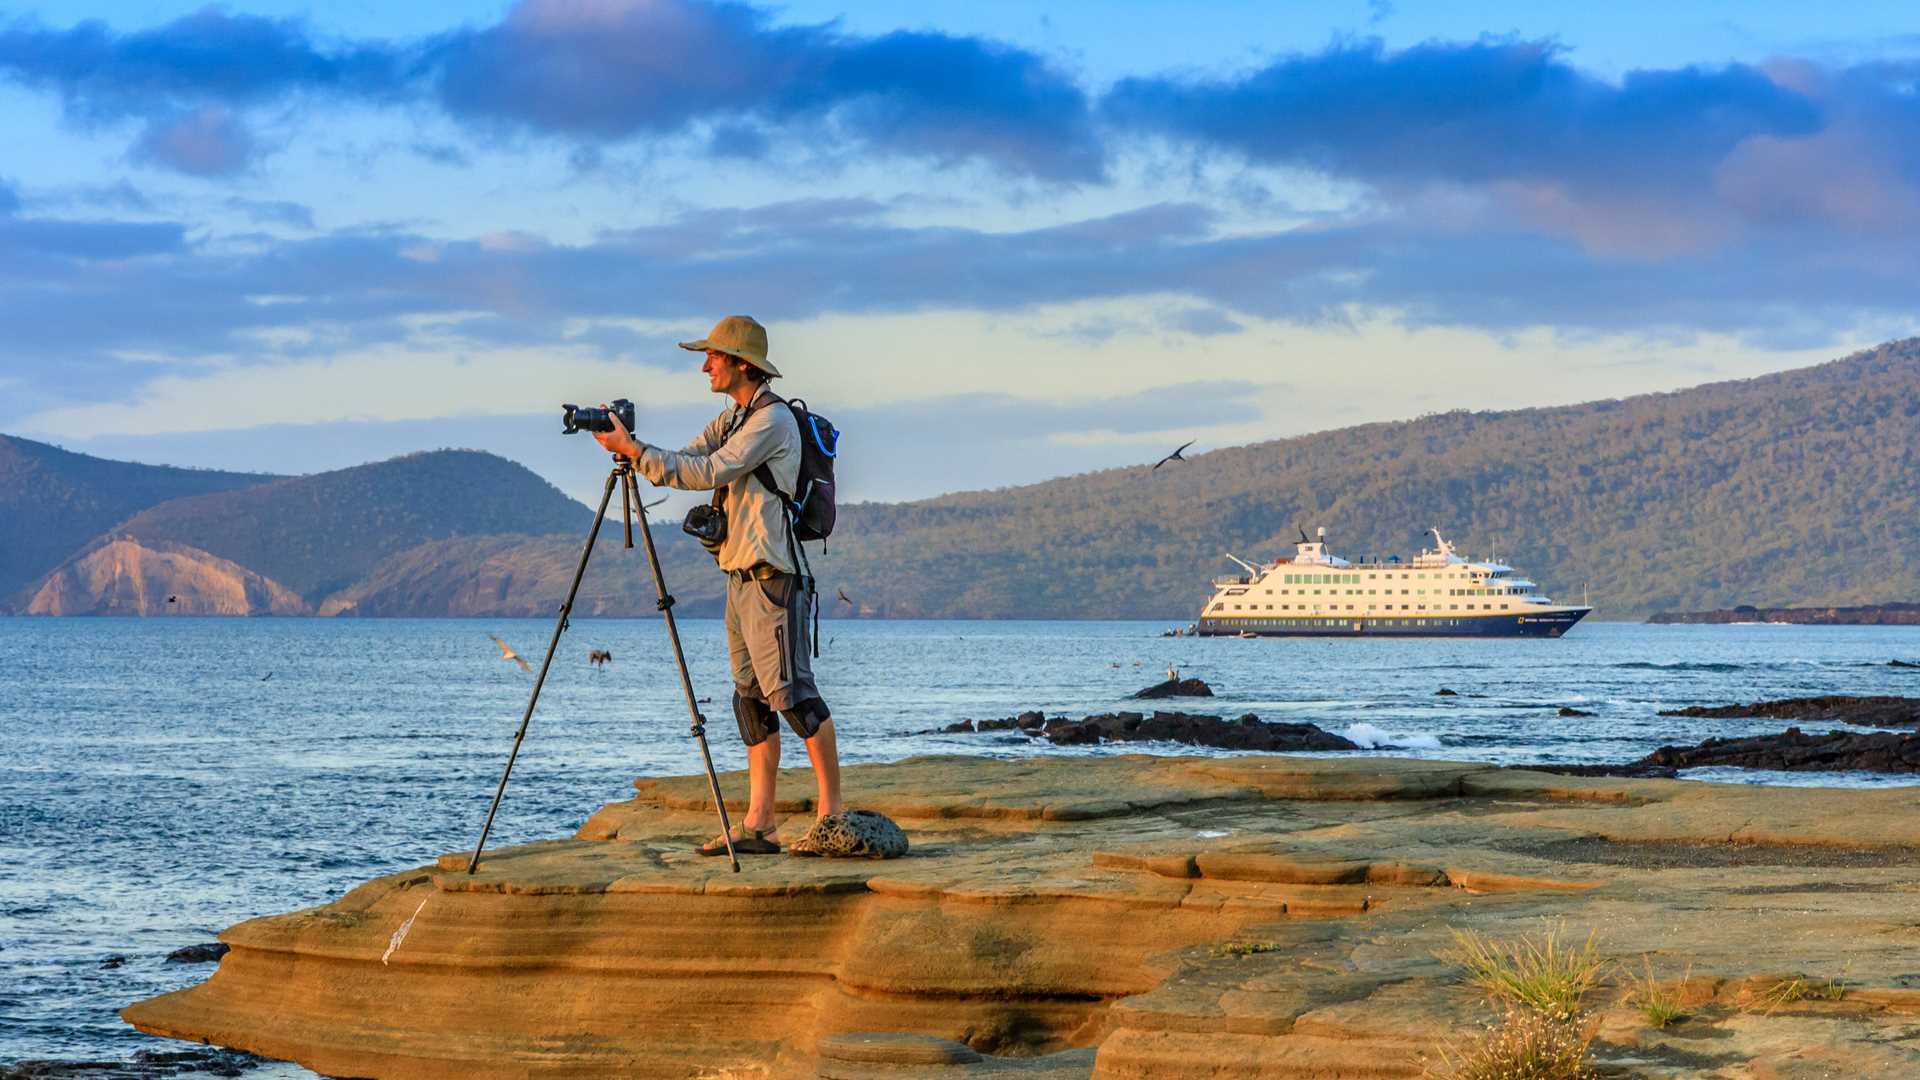 A photographer takes a photo at sunset on the rocky shores of Santiago Island, Galápagos, with the ship National Geographic Endeavour II in the background.